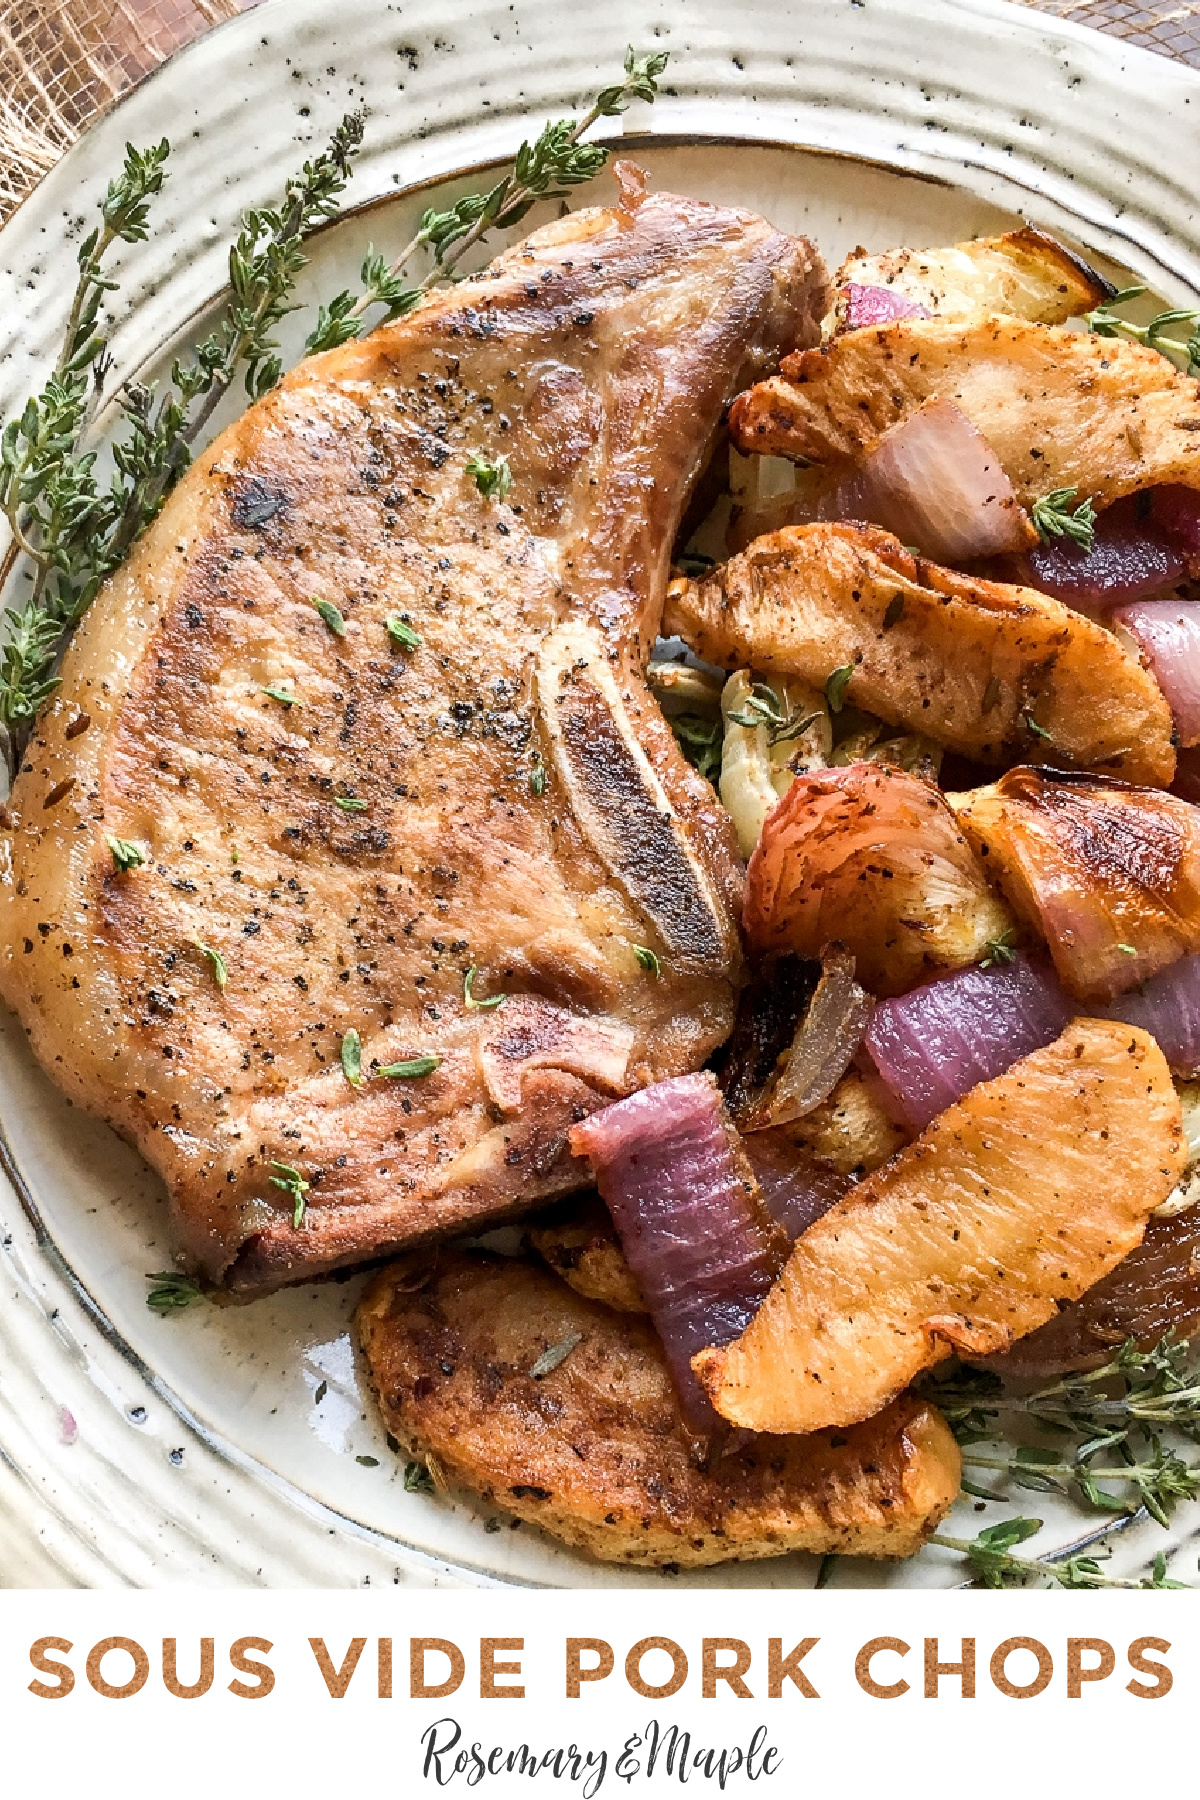 This is a great sous vide pork chops recipe that'll leave your mouth watering. It's easy to make and results in tender, juicy pork every time.